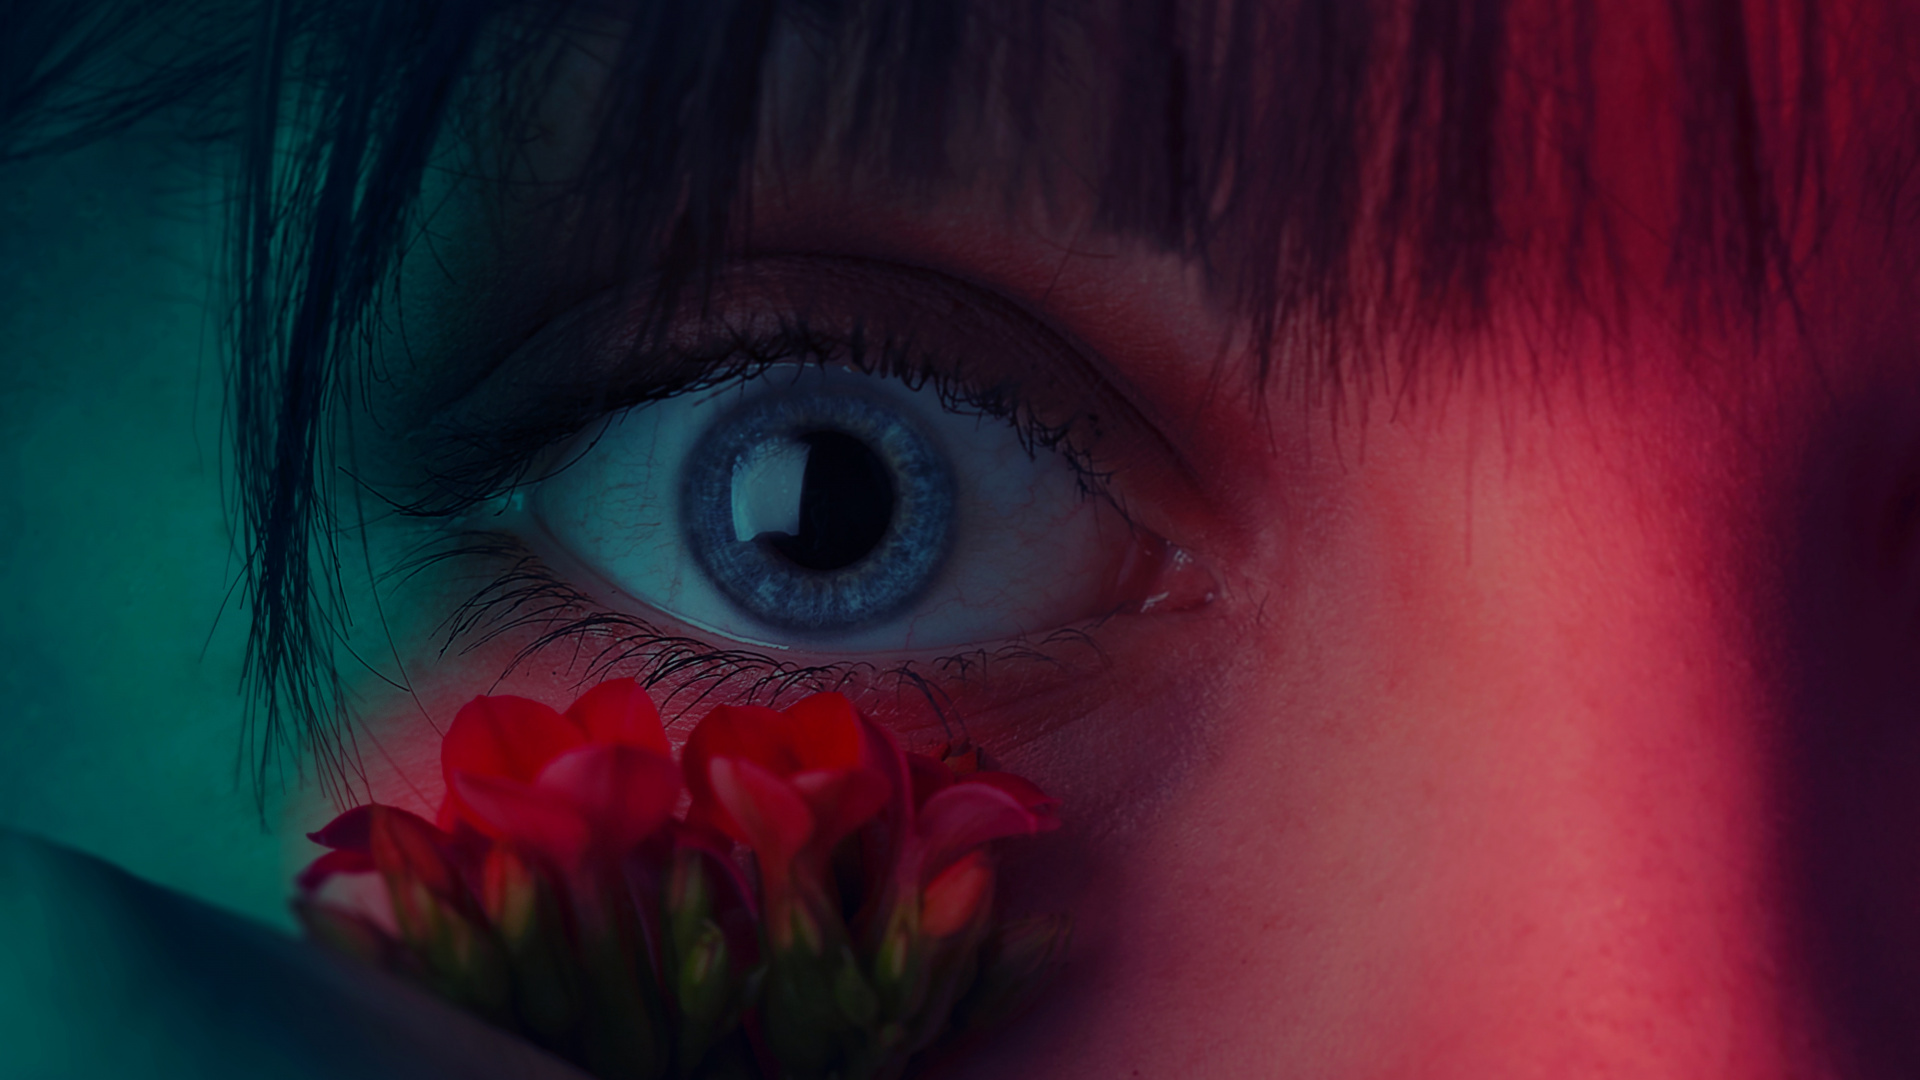 Girl With Red Flower on Her Face. Wallpaper in 1920x1080 Resolution